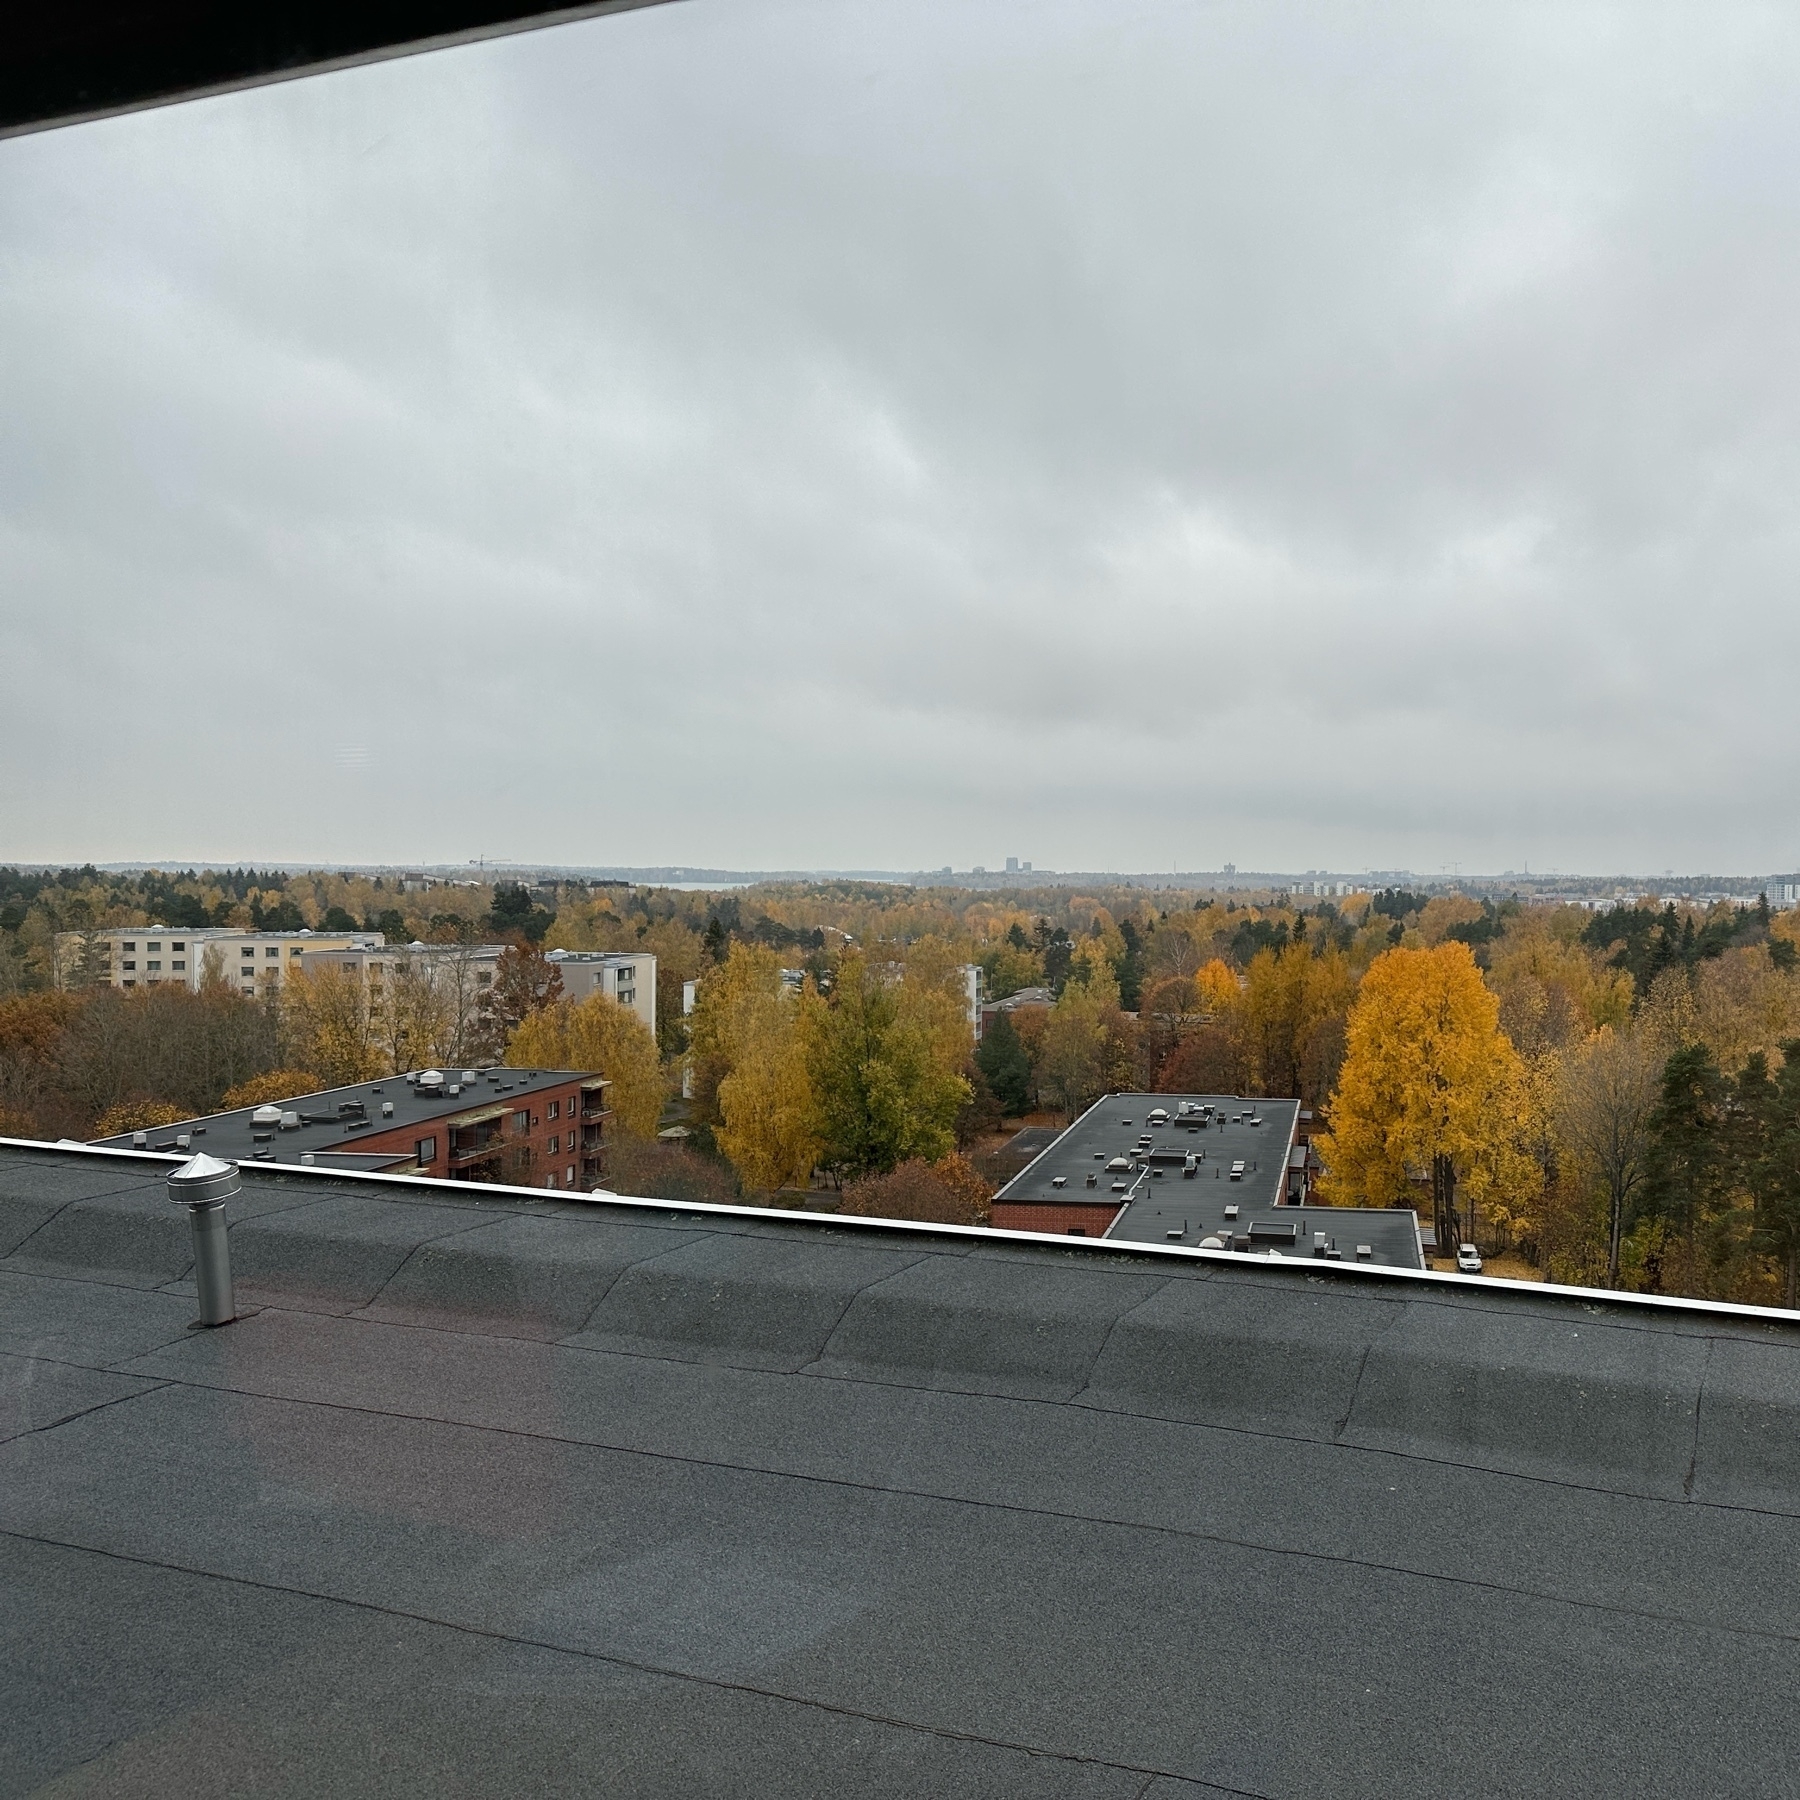 view towards some buildings, fall foliage, and some tall buildings in the horizon